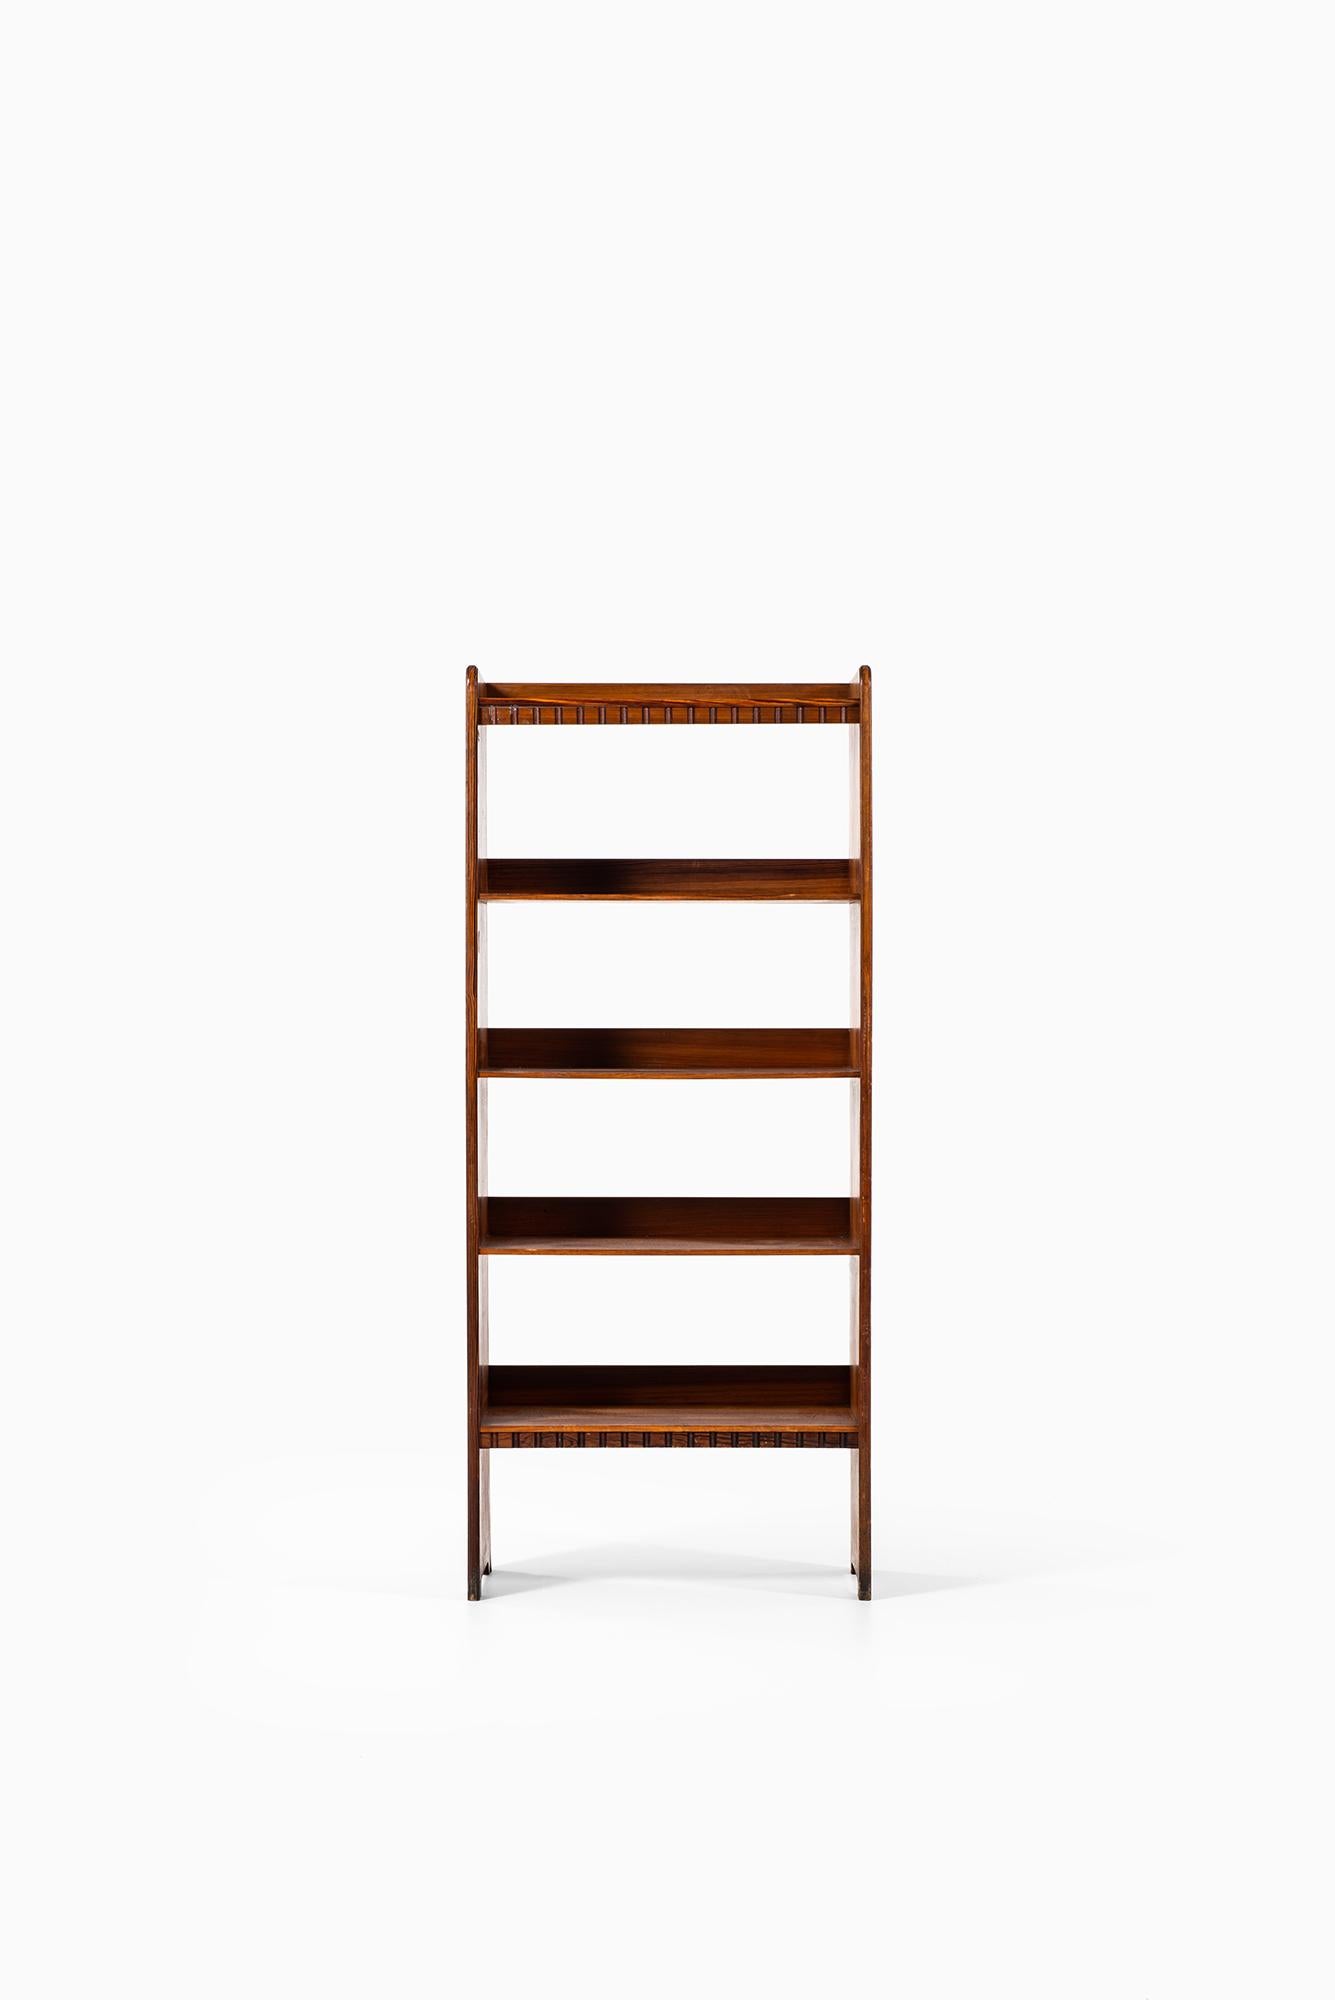 Martin Nyrop Bookcases in Oregon Pine Produced by Rud Rasmussen in Denmark 2